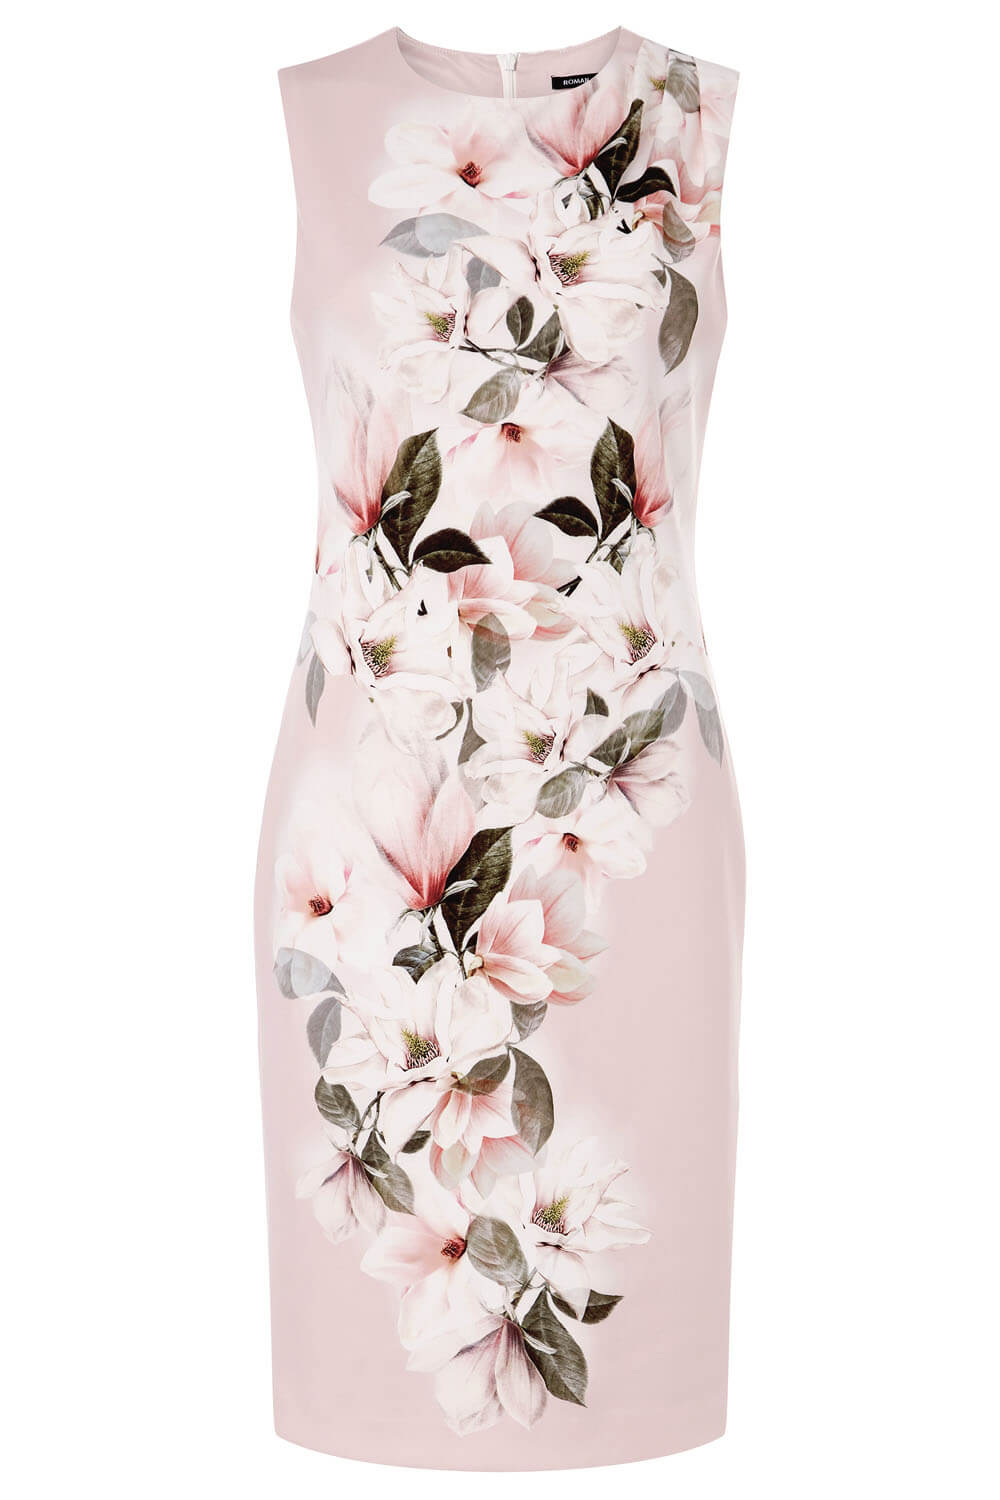 Fitted Floral Print Luxe Stretch Dress in Light-Pink - Roman Originals UK